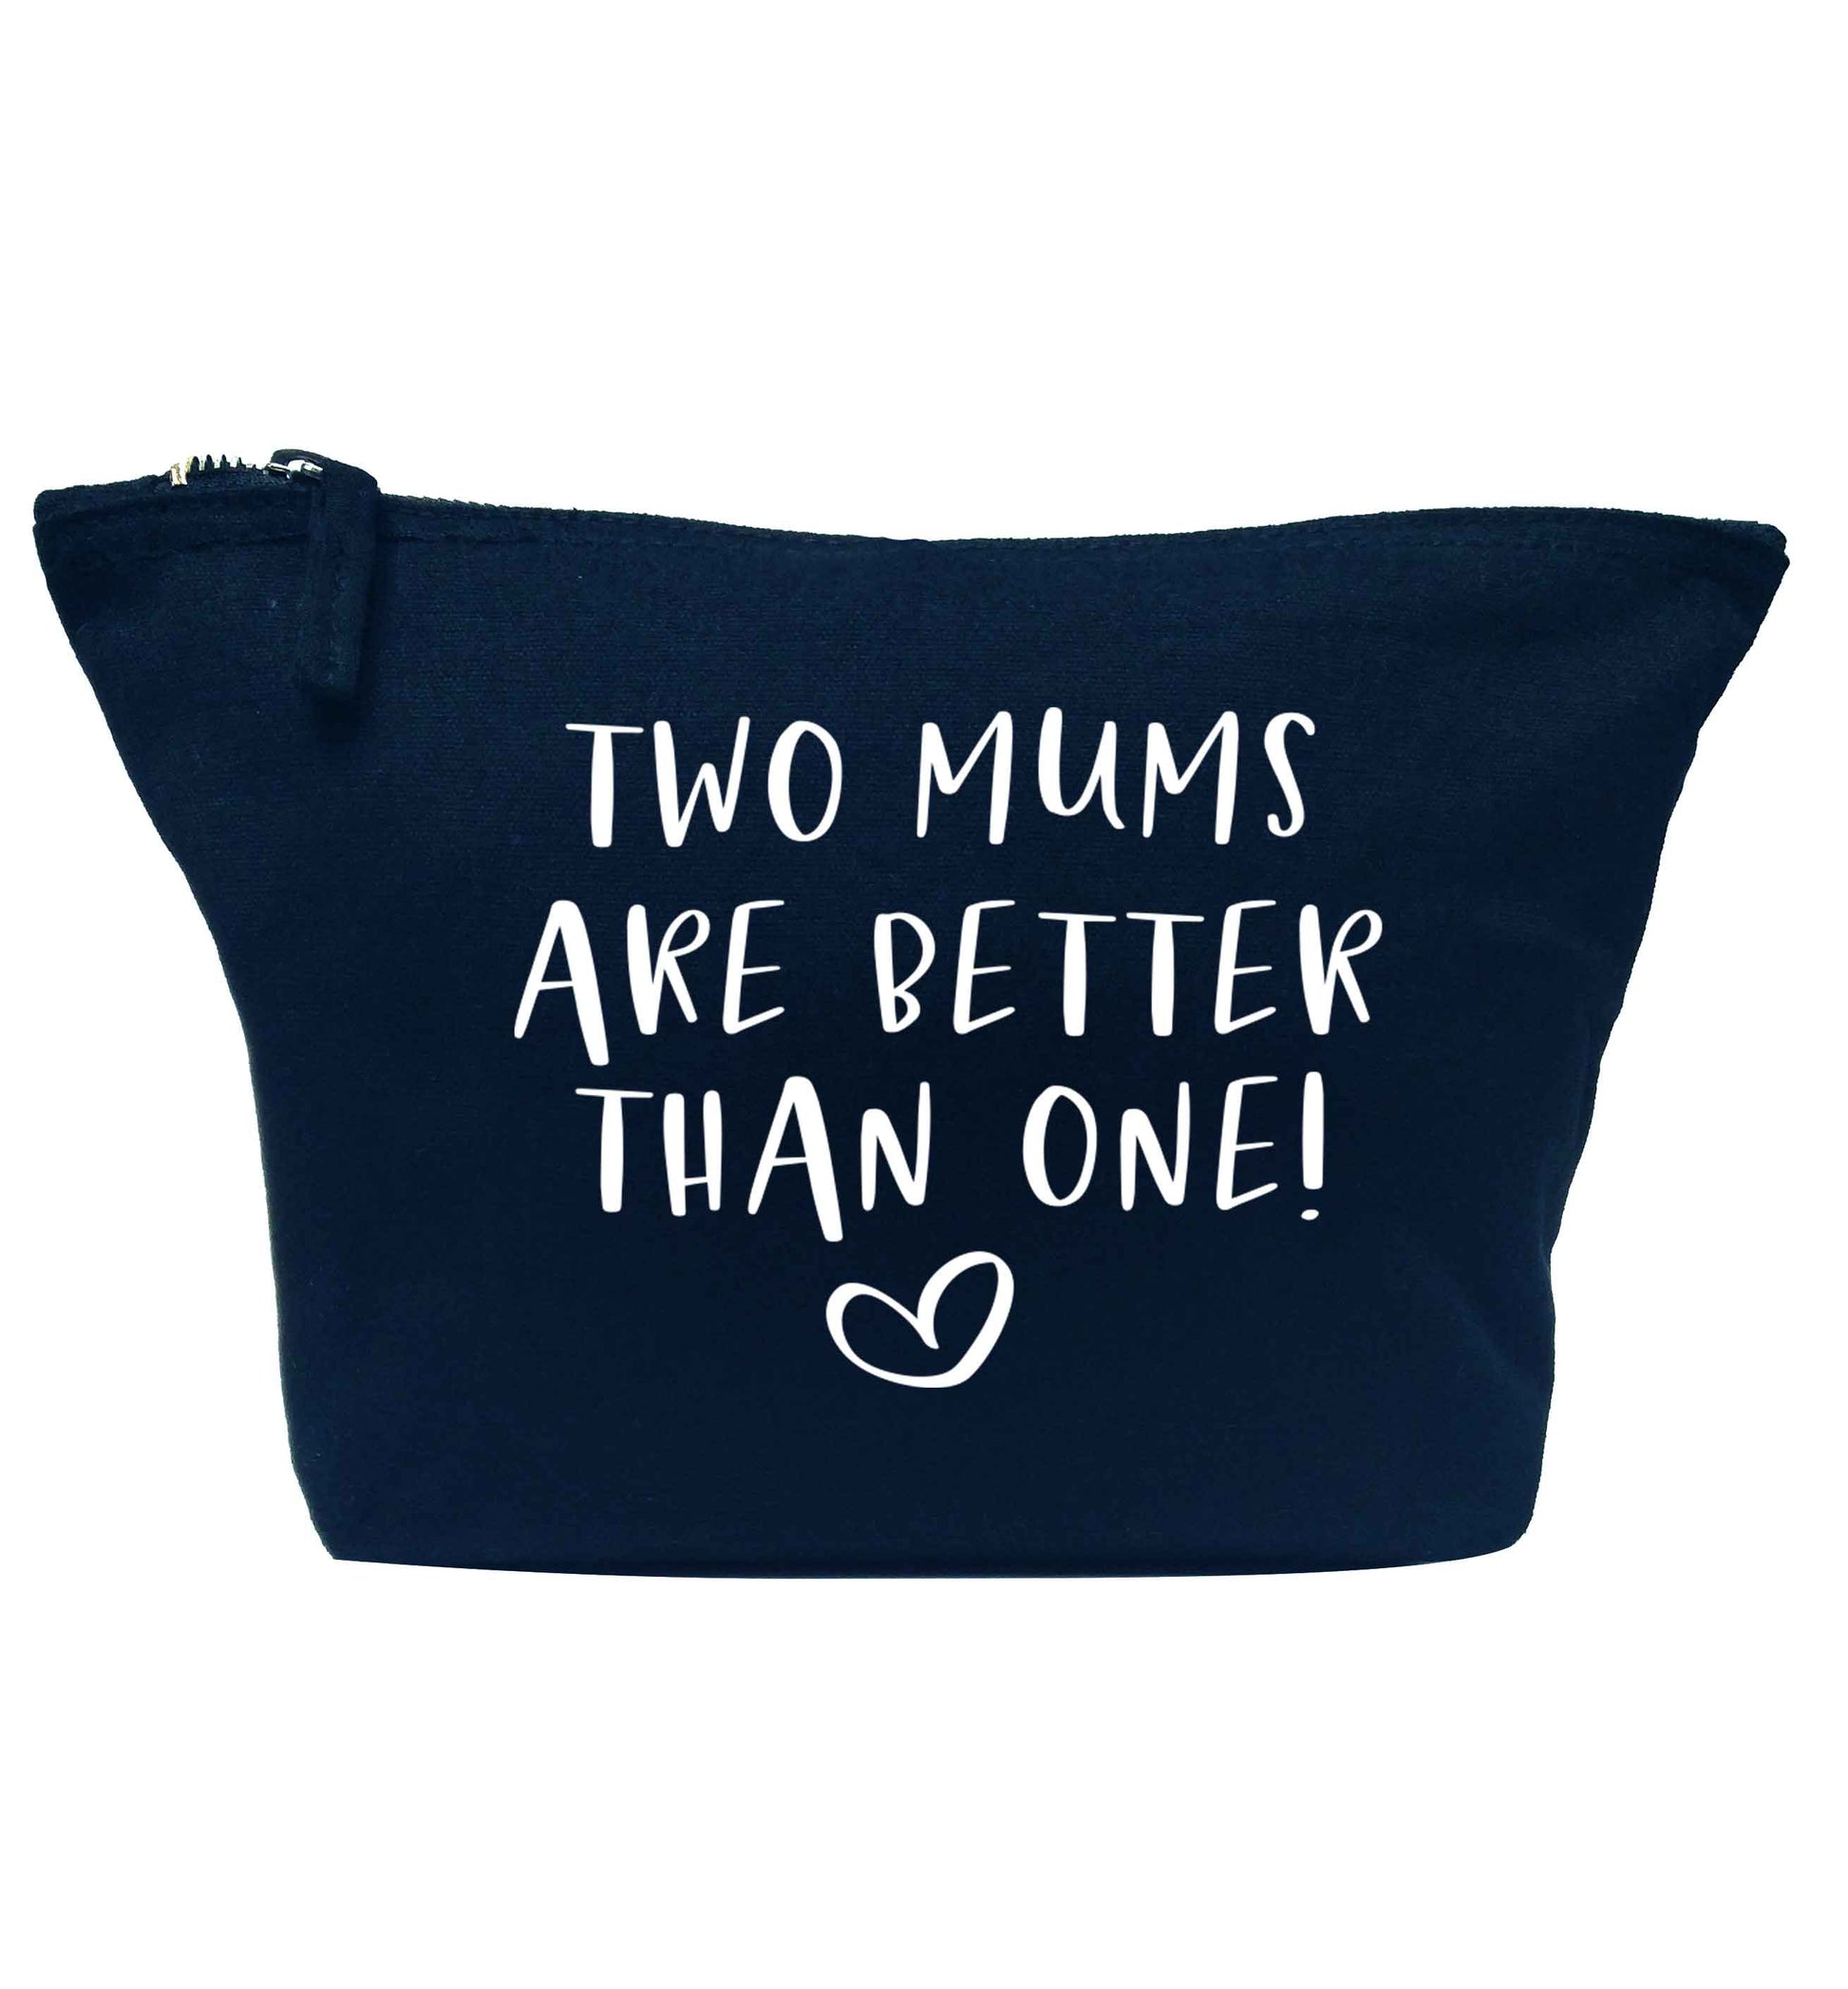 Two mums are better than one navy makeup bag